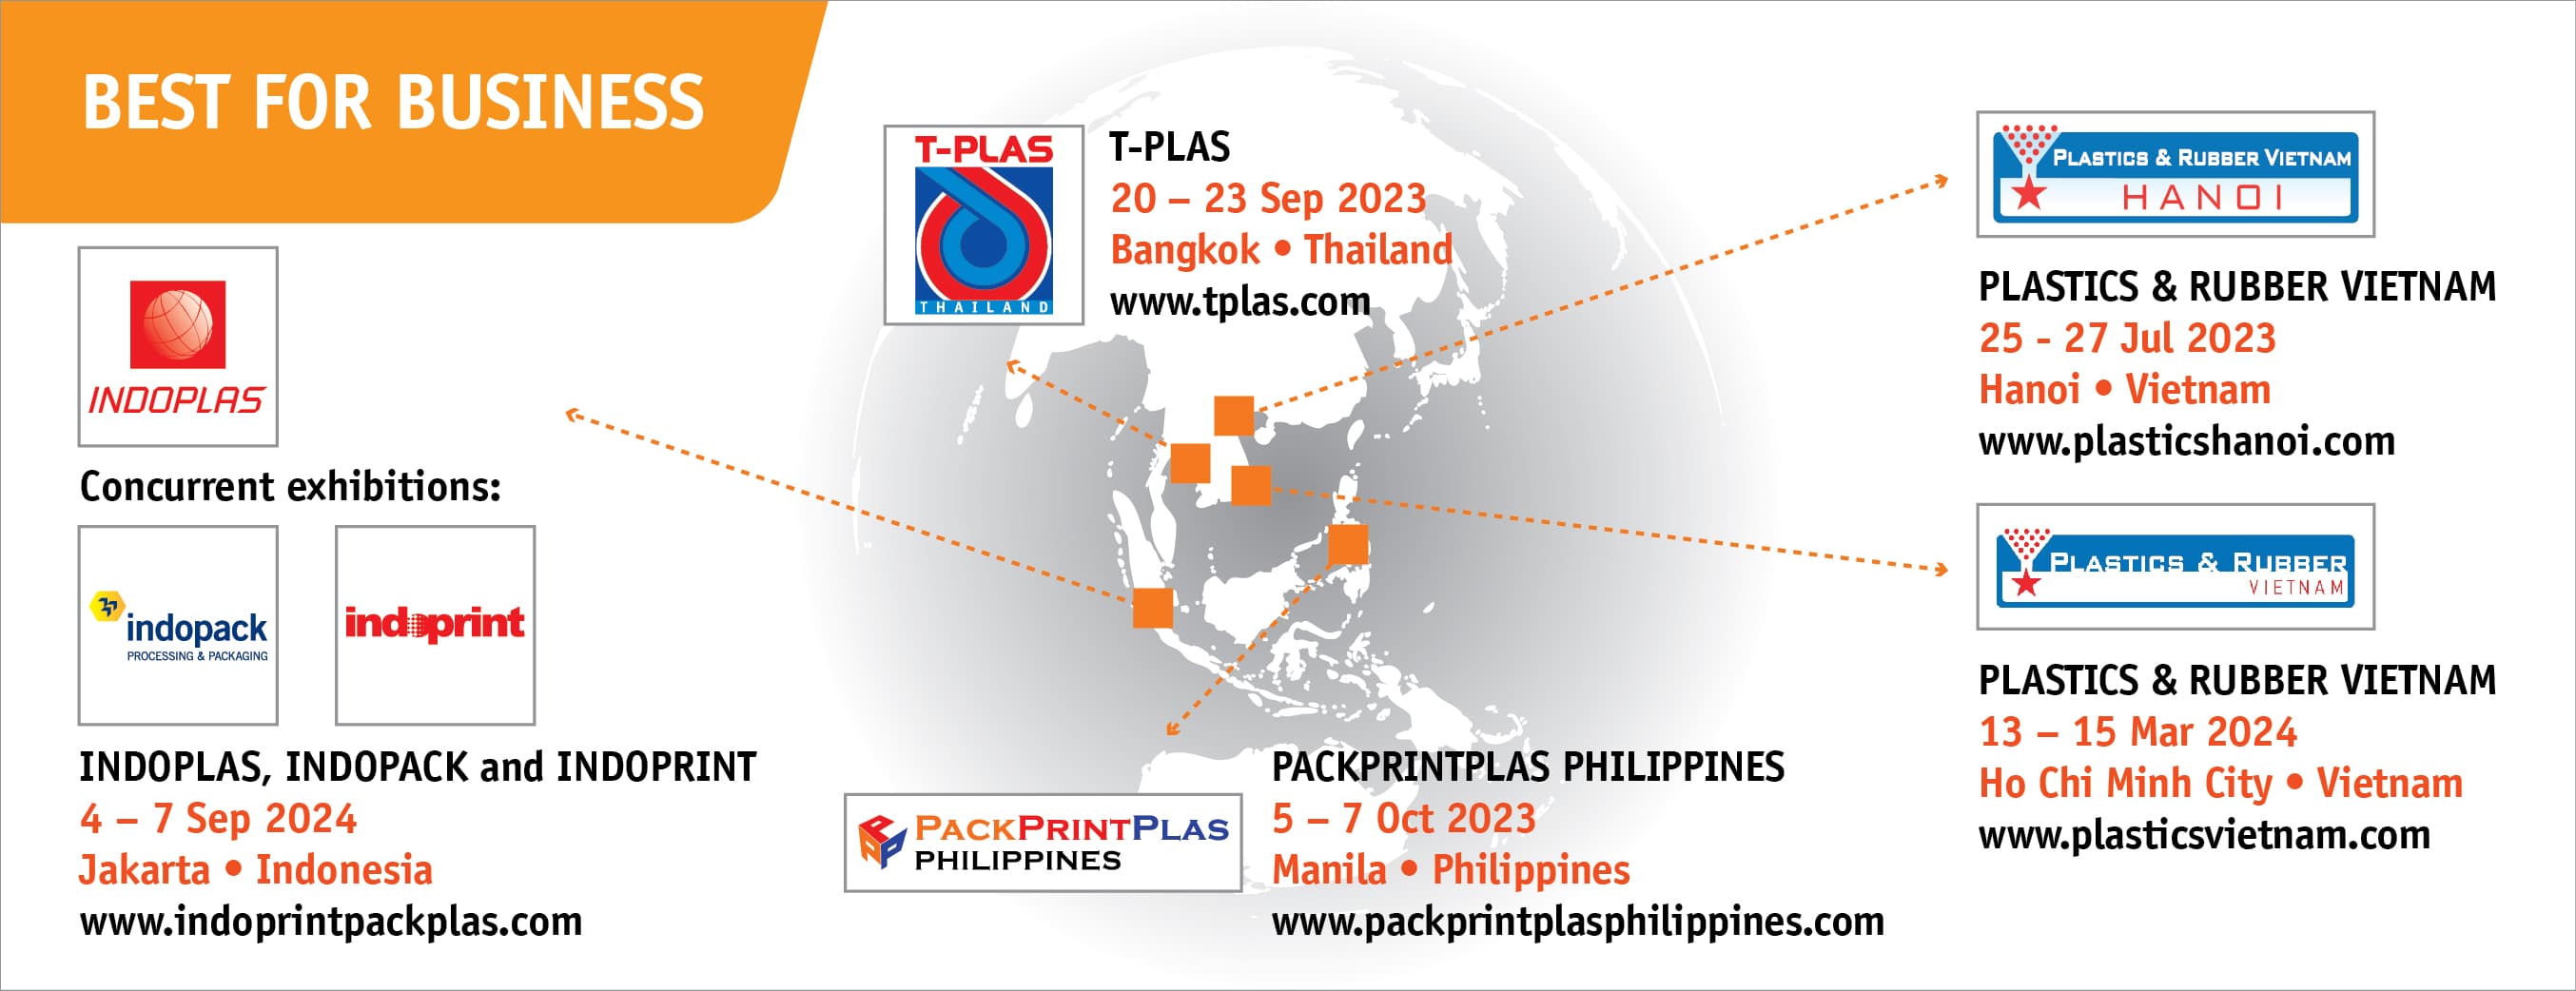 Partner Events for Southeast Asia